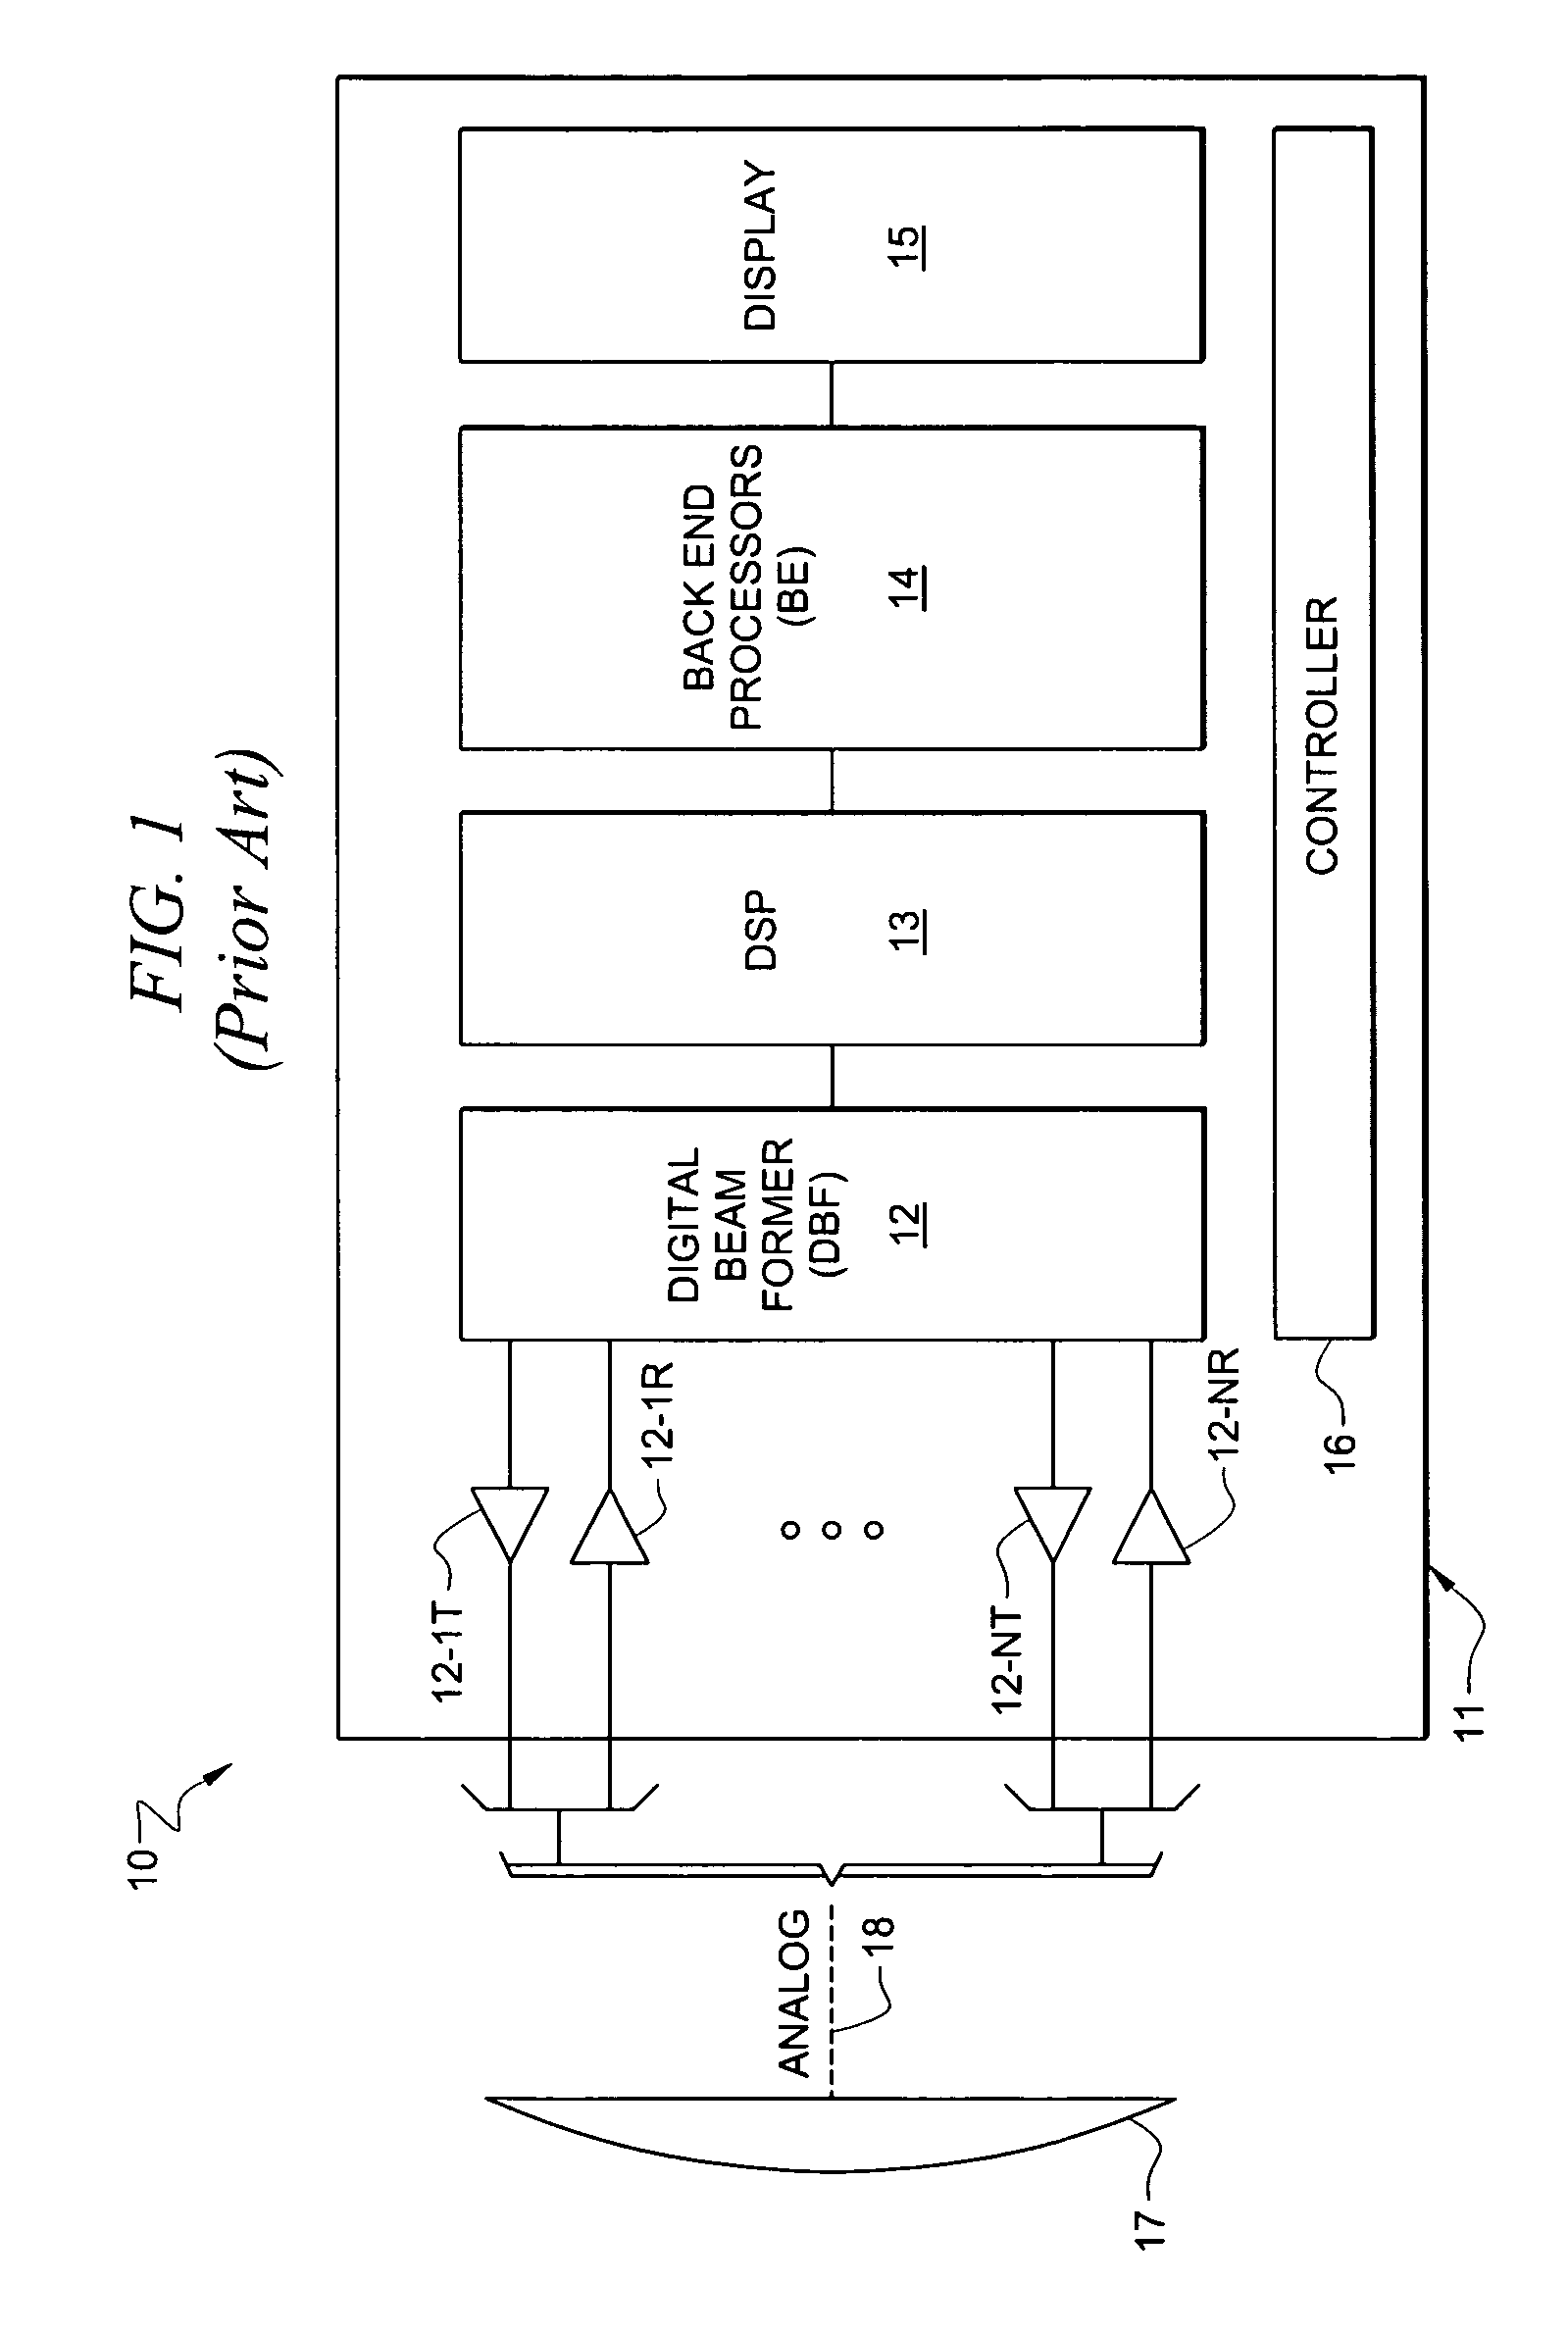 Ultrasonic transducer having distributed weight properties